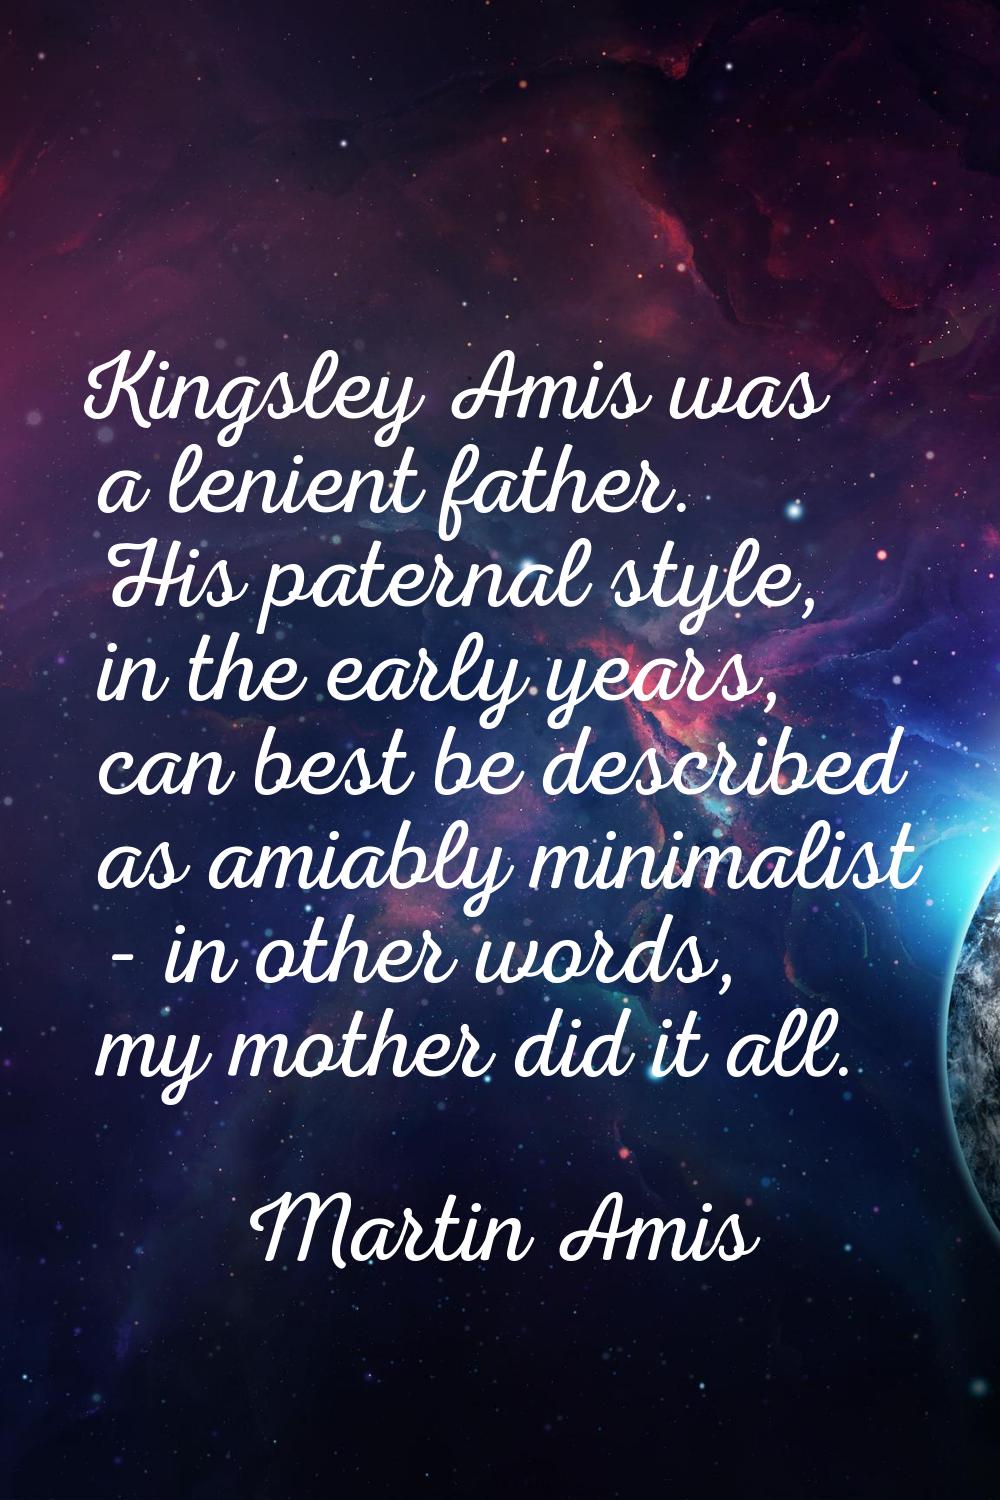 Kingsley Amis was a lenient father. His paternal style, in the early years, can best be described a